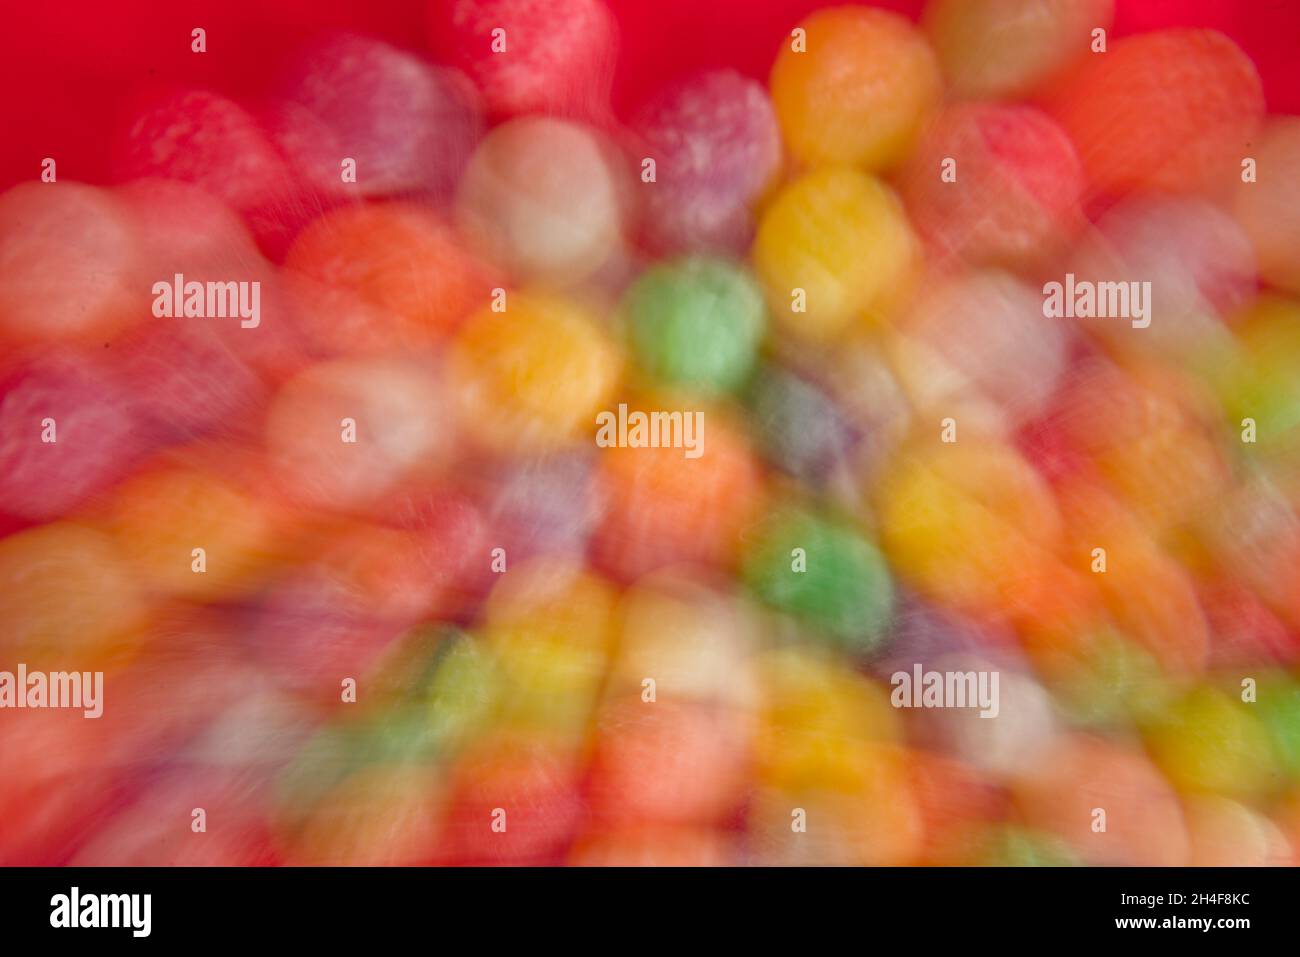 Colorful fusion of shape, texture, form and design of rounded shaped candies, purposely out focus. Attention grabber, pulls the viewer in Stock Photo